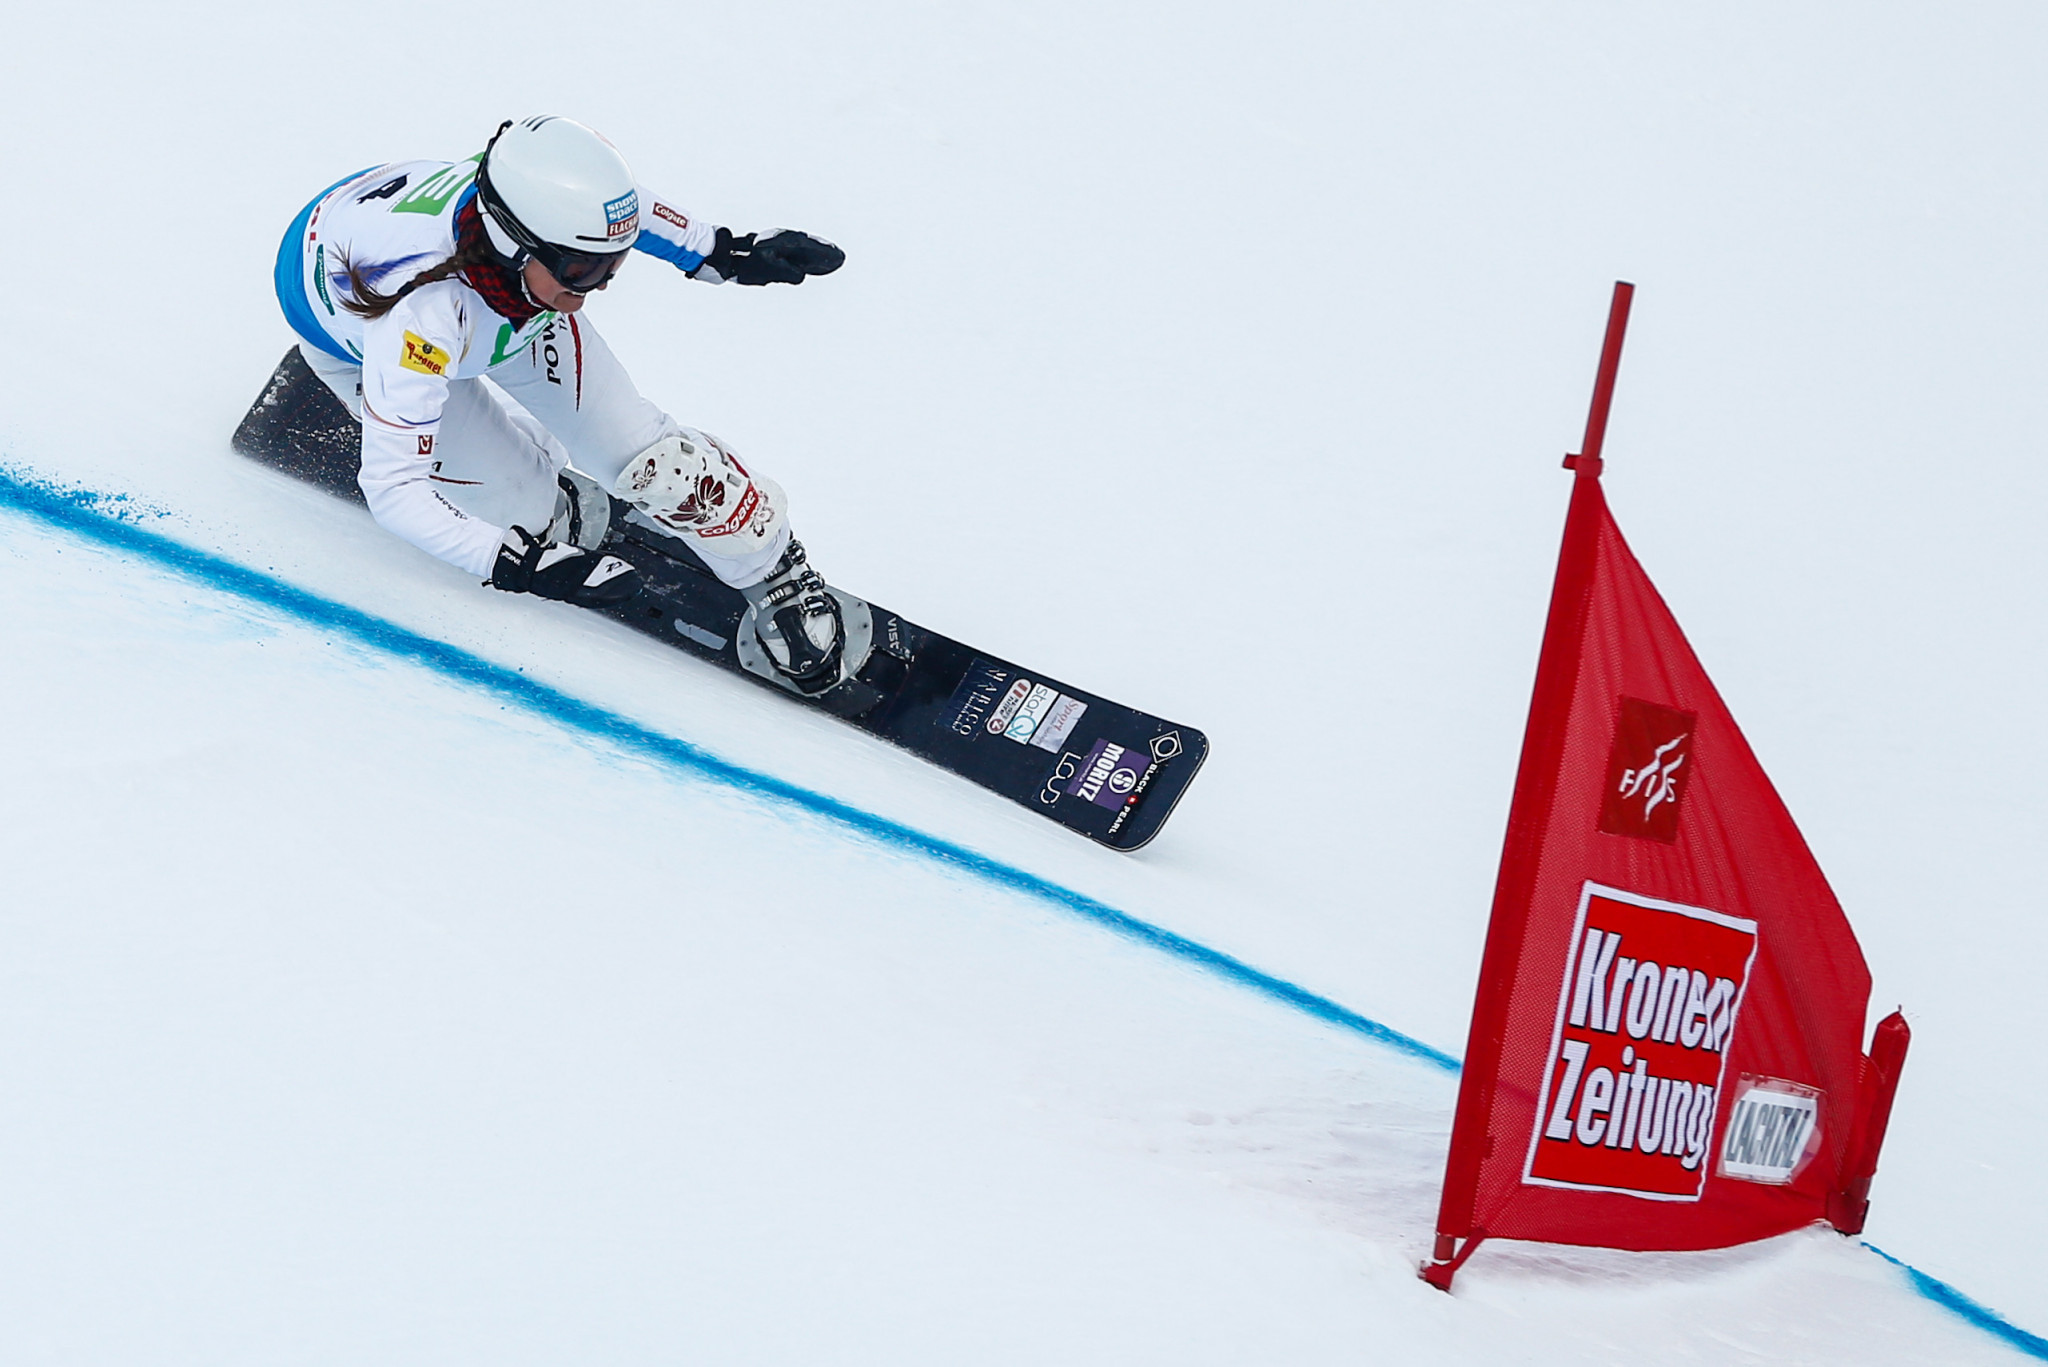 Riegler wins FIS Snowboard World Cup parallel slalom event in Bad Gastein at 45